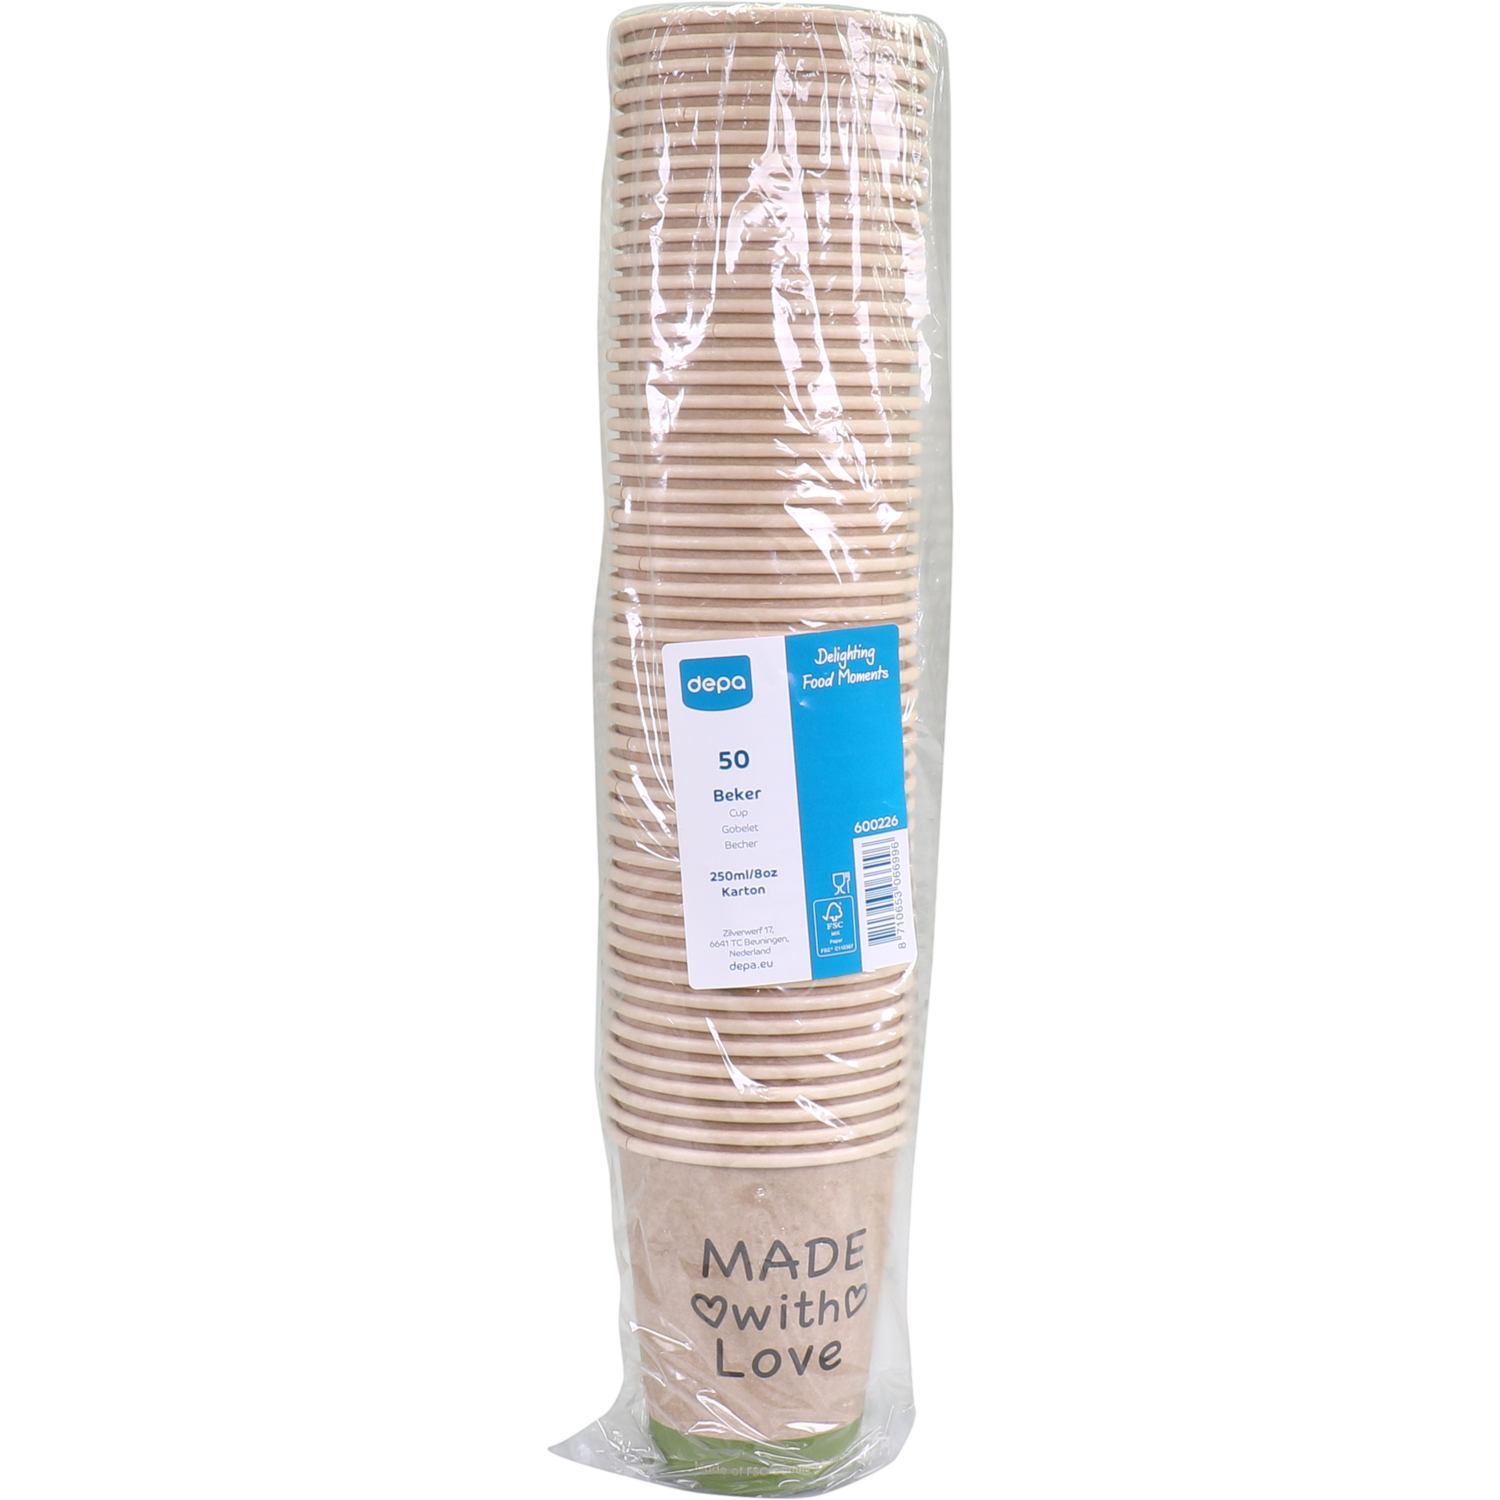  Beker, Made with Love, Bamboe/PE, 250ml, 8oz,  2